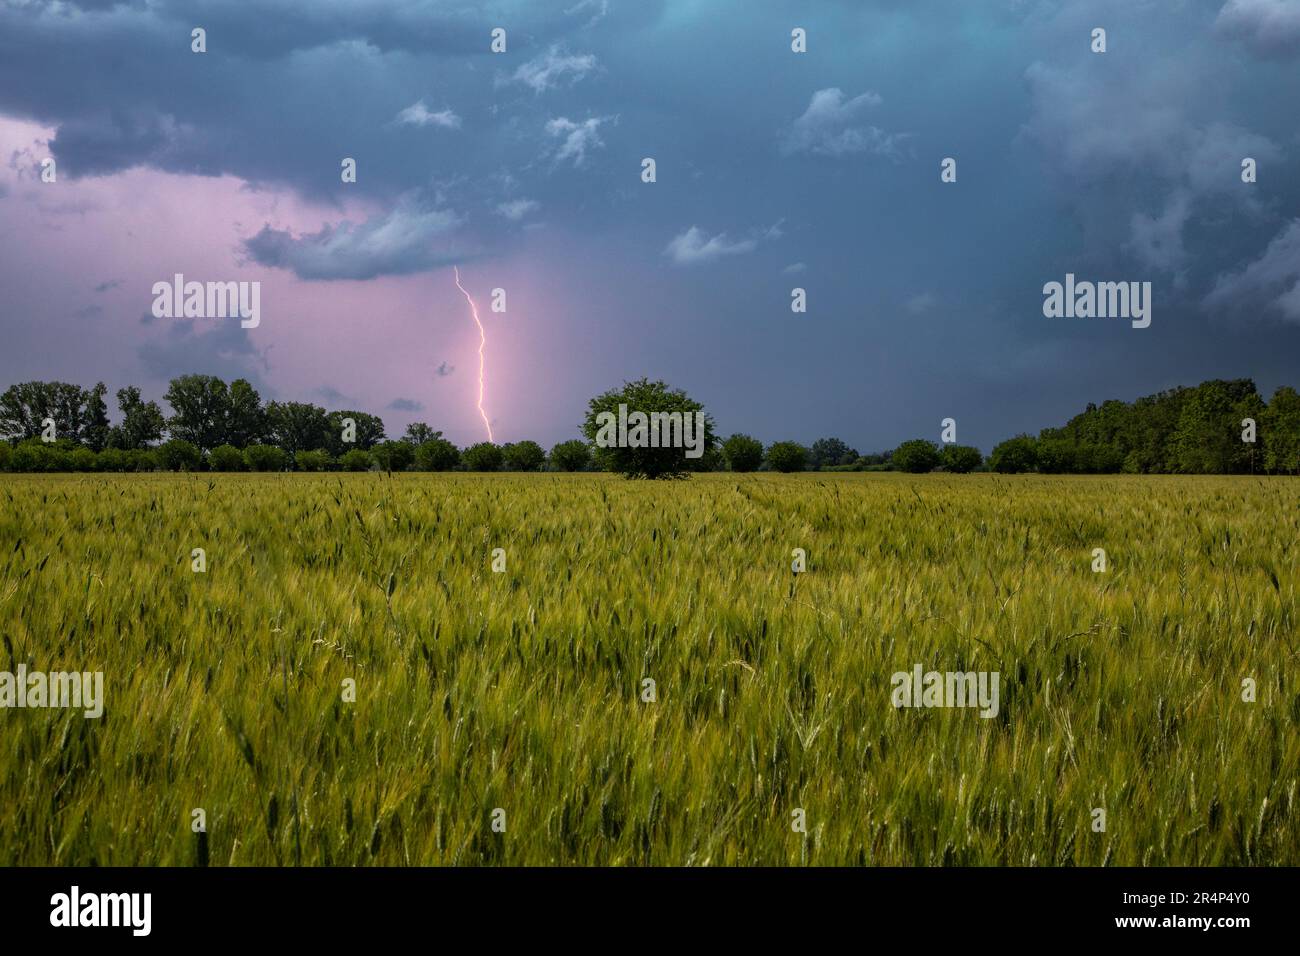 Rural landscape of cultivated fields and clouds Stock Photo